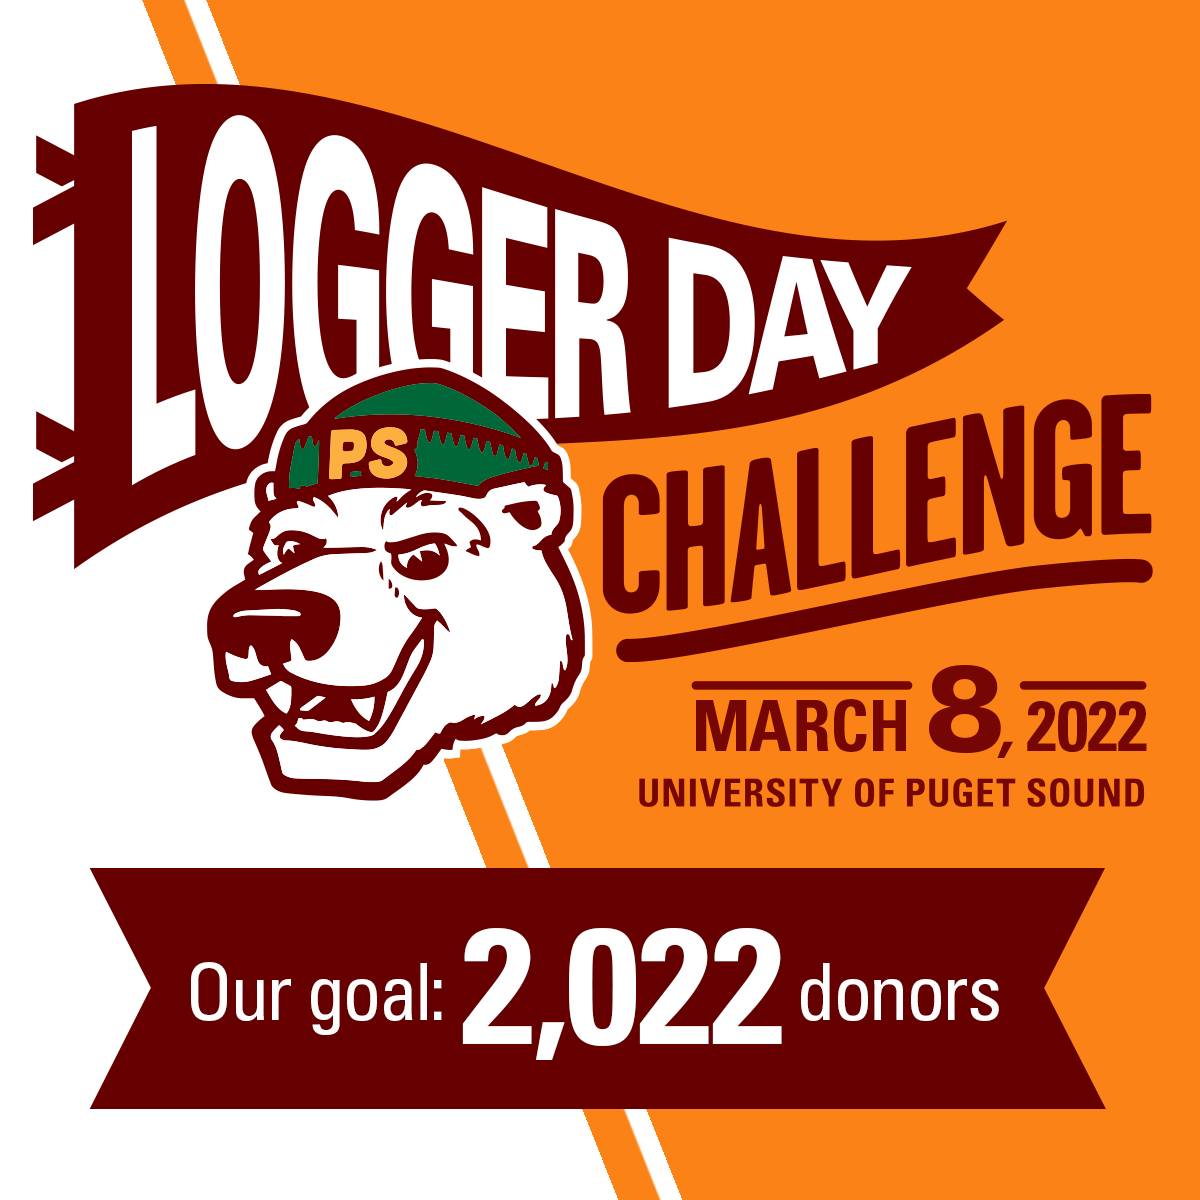 Logger Day Challenge, Our Goal: 2,022 Donors